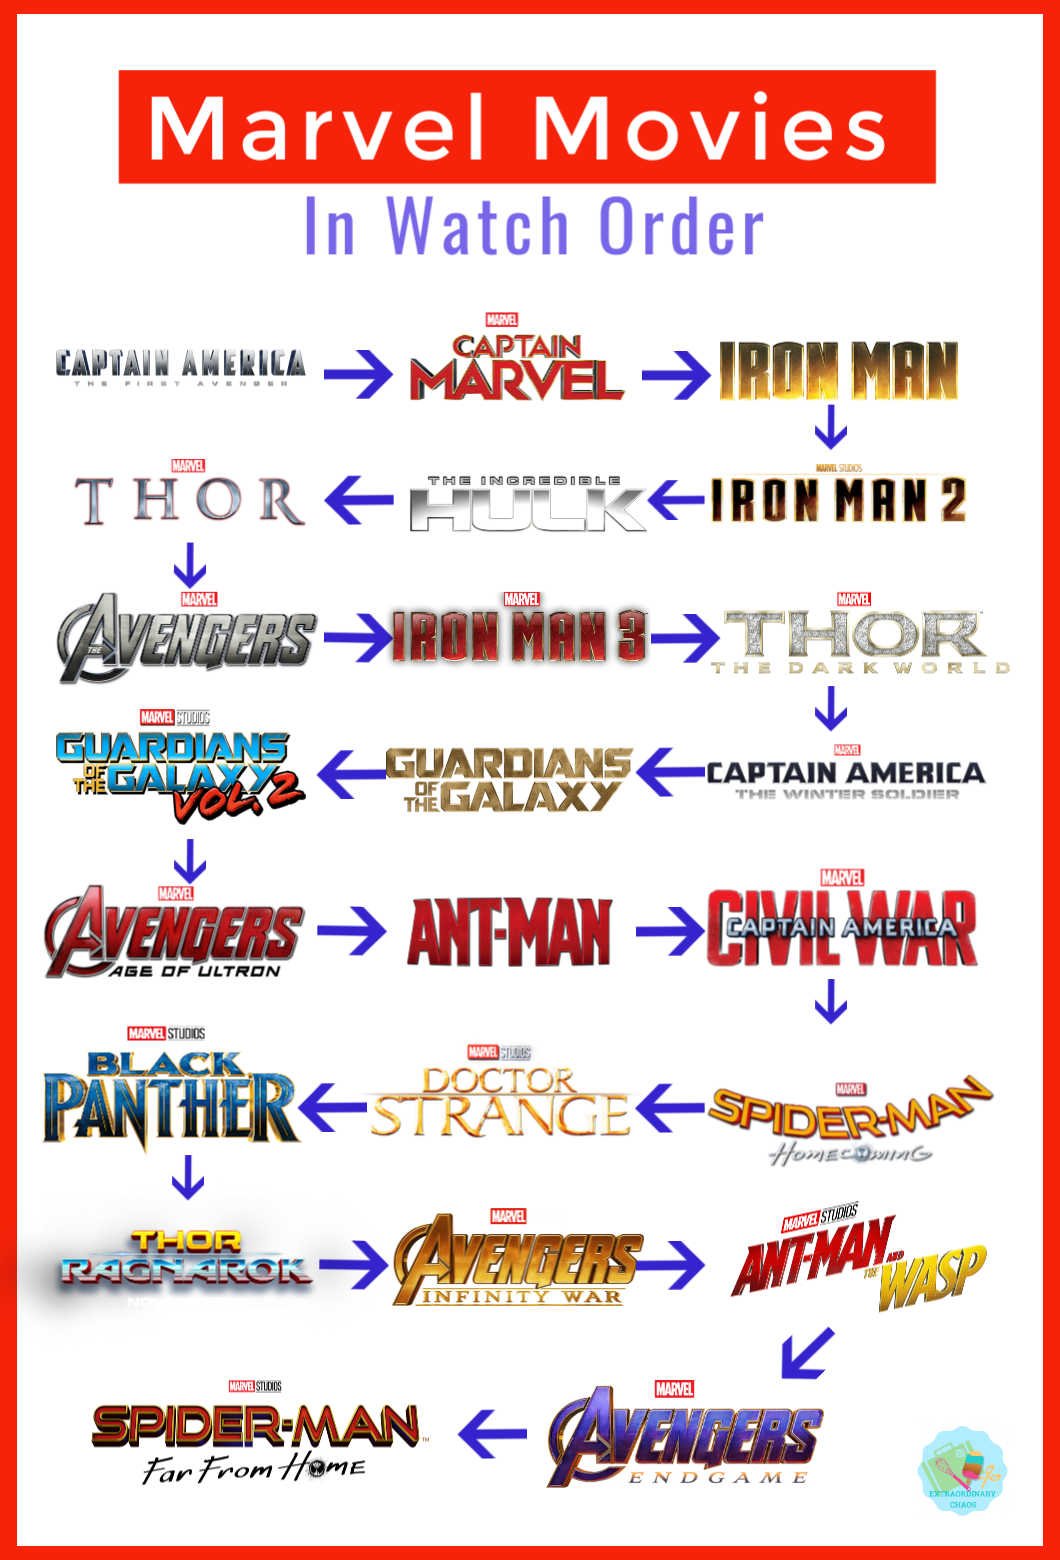 Infographic for you to pin or save which will help you keep track of the order of the Marvel Movies